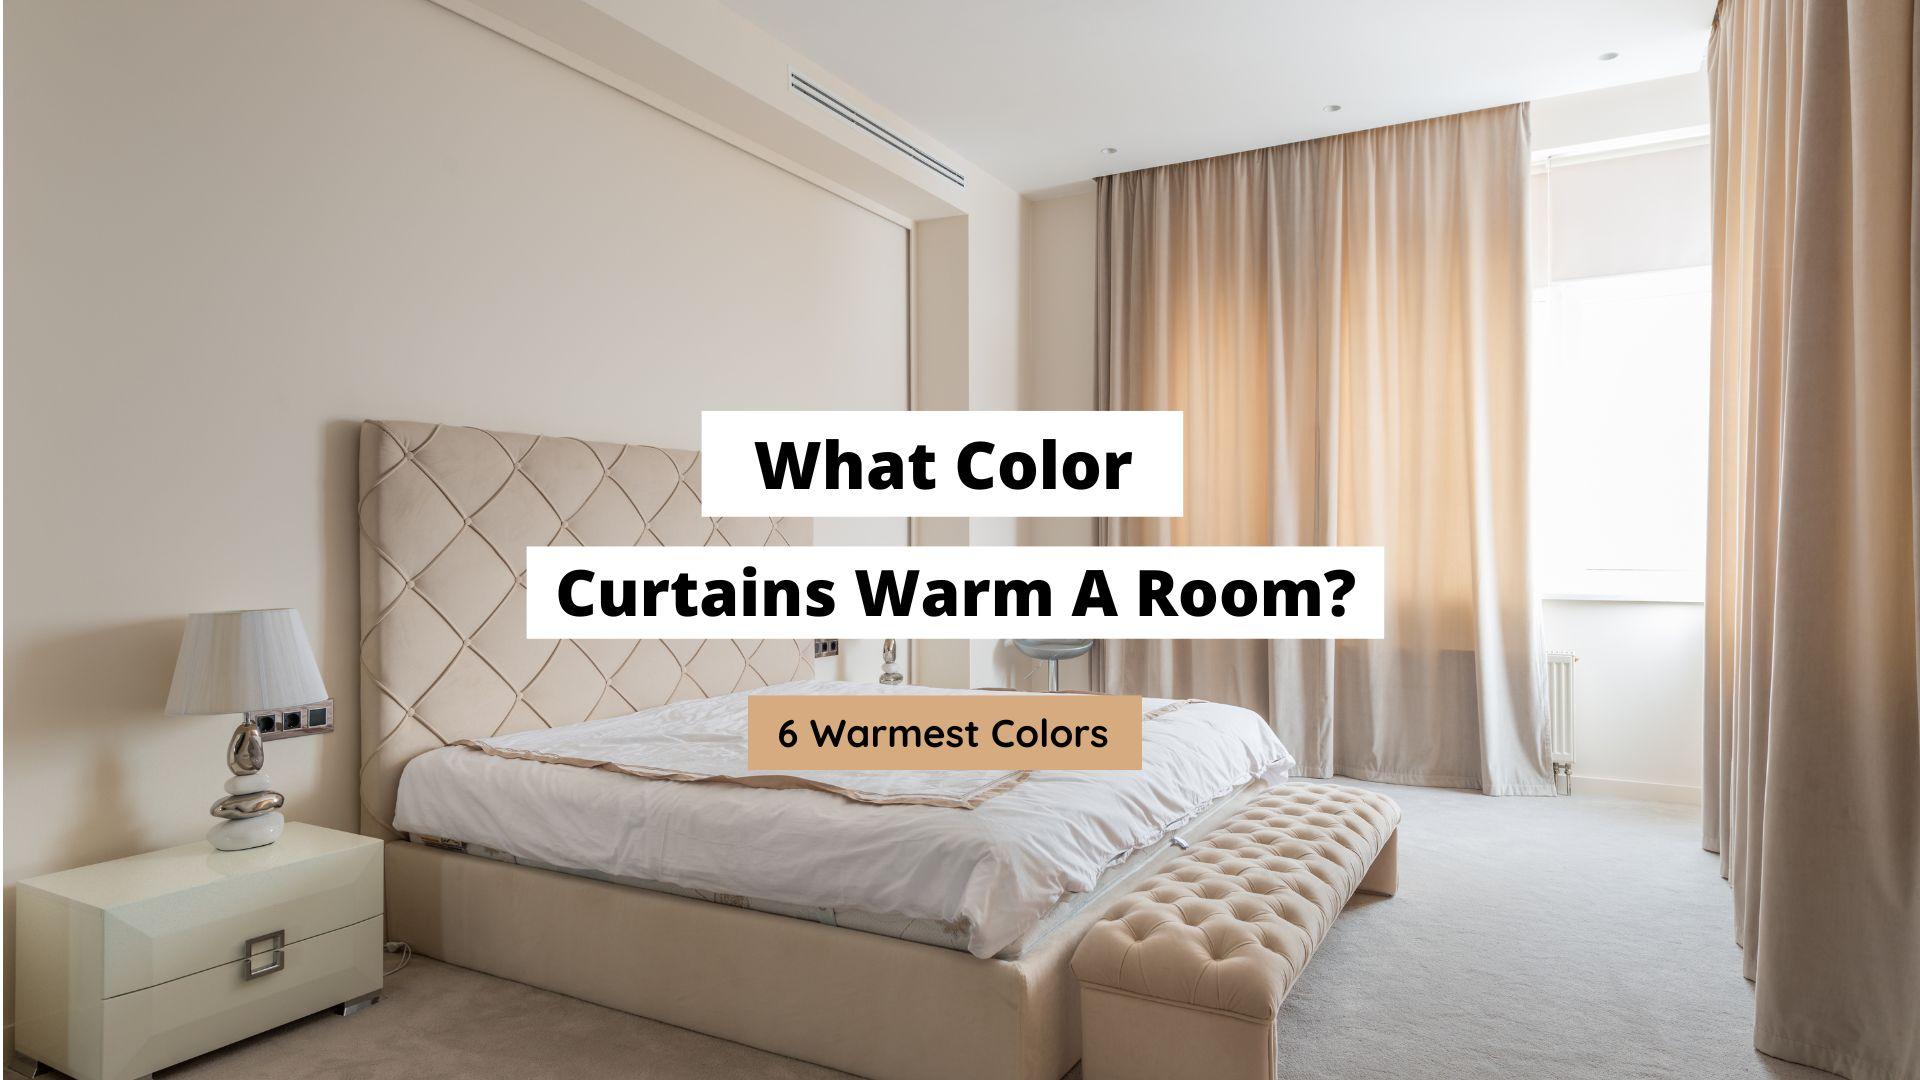 What Color Curtains Warm A Room